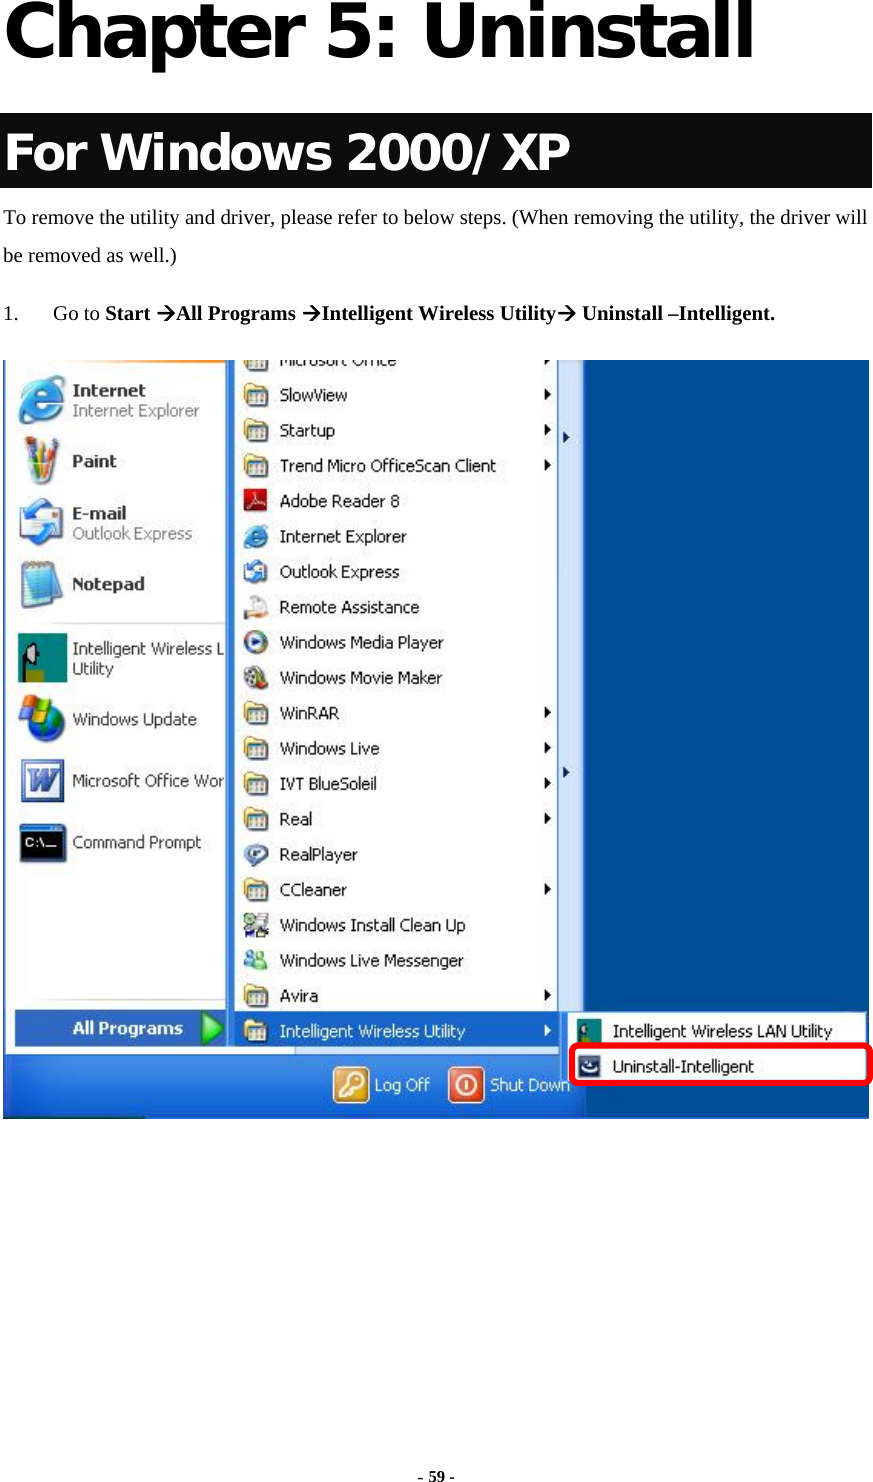  - 59 -  Chapter 5: Uninstall For Windows 2000/XP To remove the utility and driver, please refer to below steps. (When removing the utility, the driver will be removed as well.) 1. Go to Start All Programs Intelligent Wireless Utility Uninstall –Intelligent.  